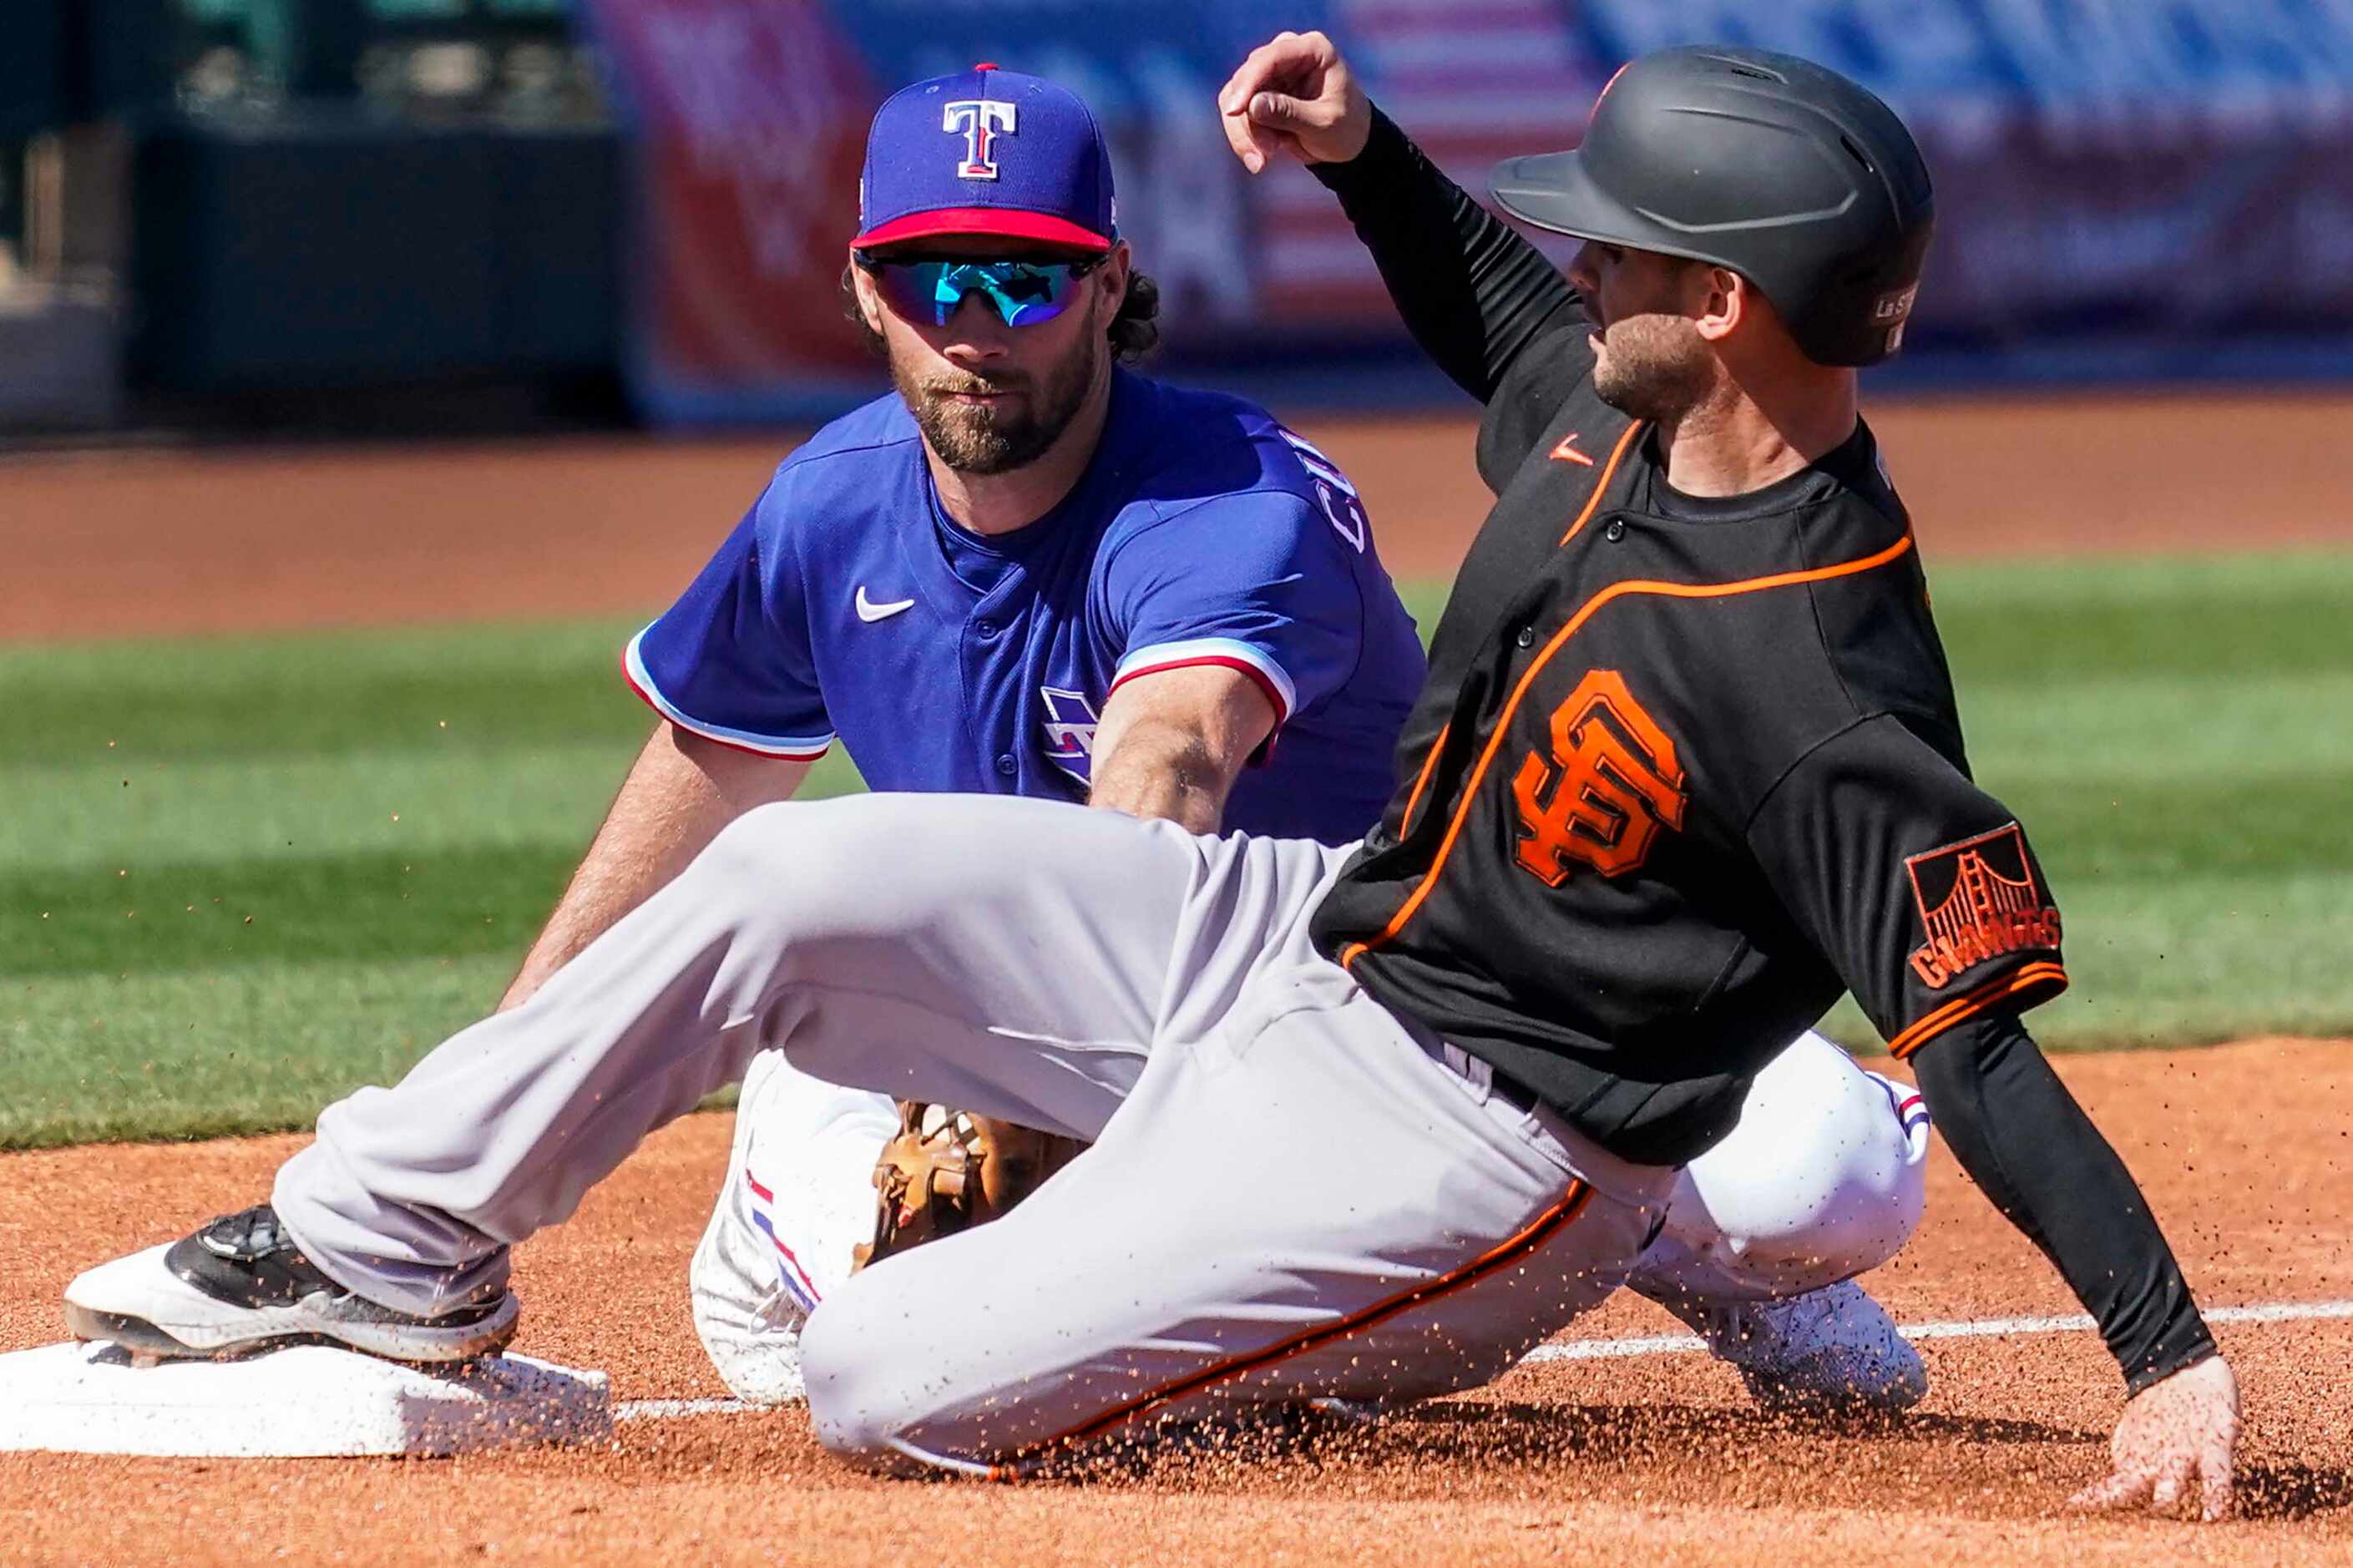 San Francisco Giants second baseman Tommy La Stella is safe at third base ahead of the tag...